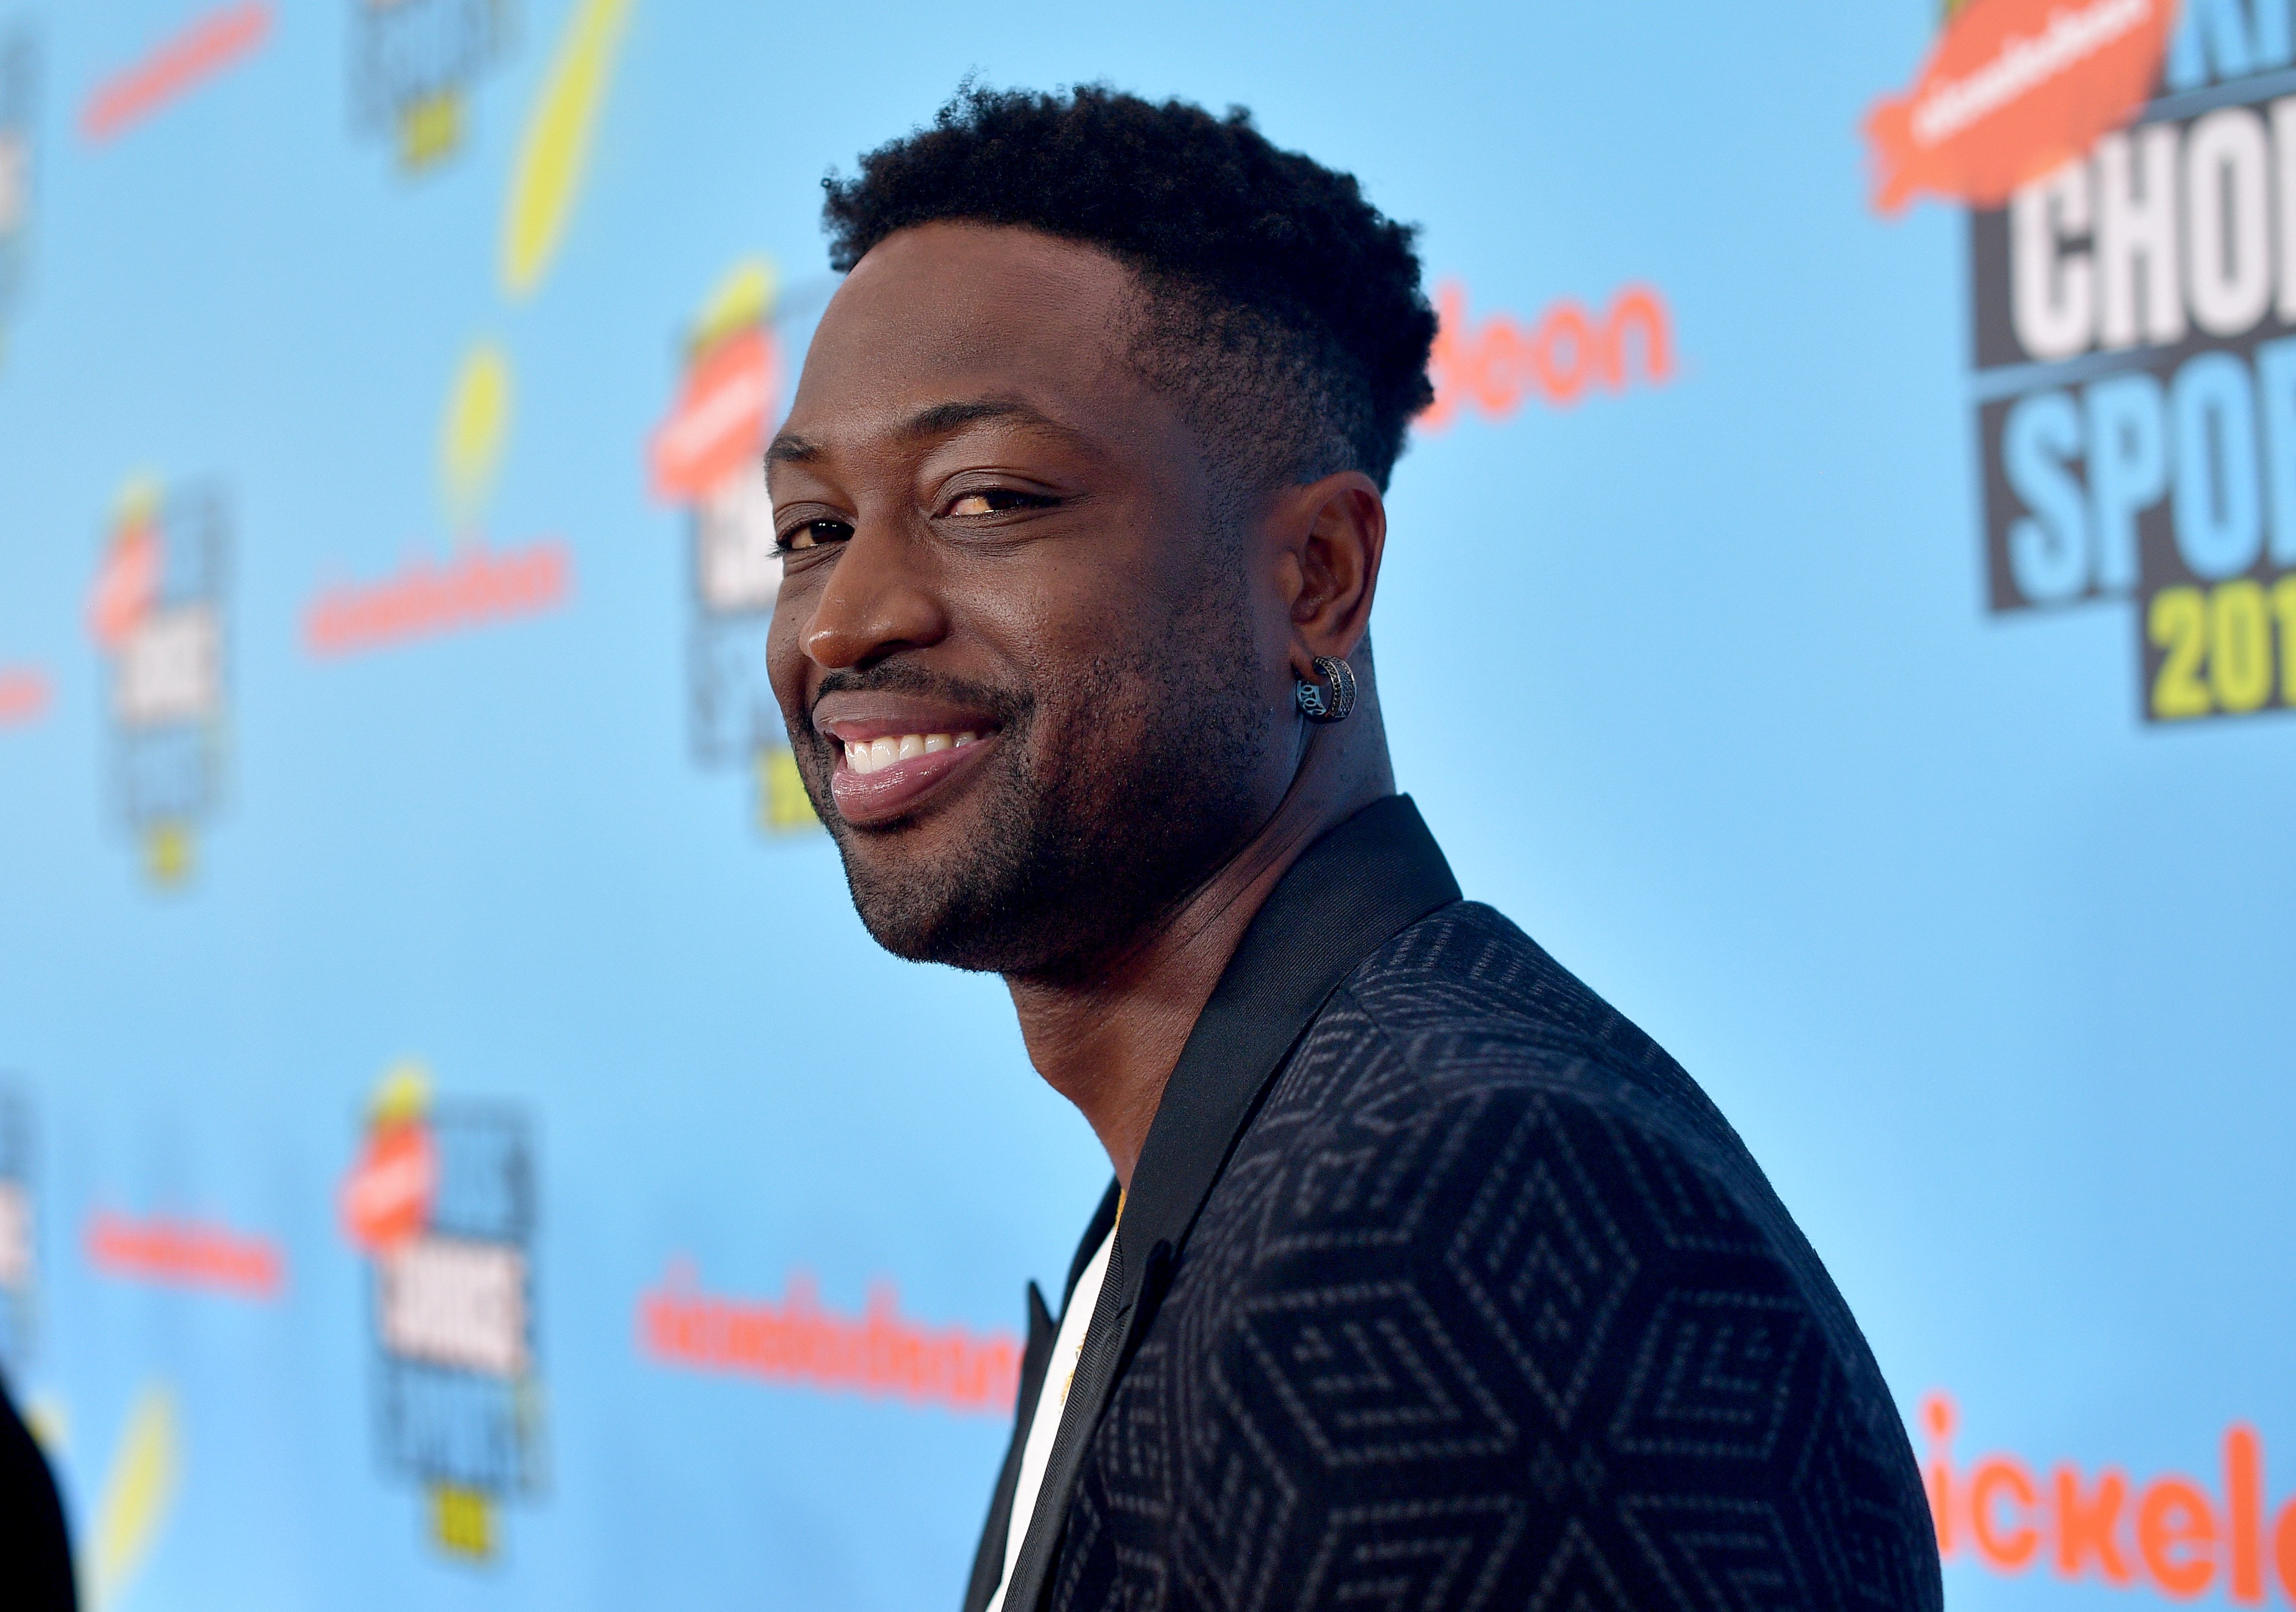 Dwyane Wade attends Nickelodeon Kids' Choice Sports 2019 at Barker Hangar on July 11, 2019. | Photo: Getty Images